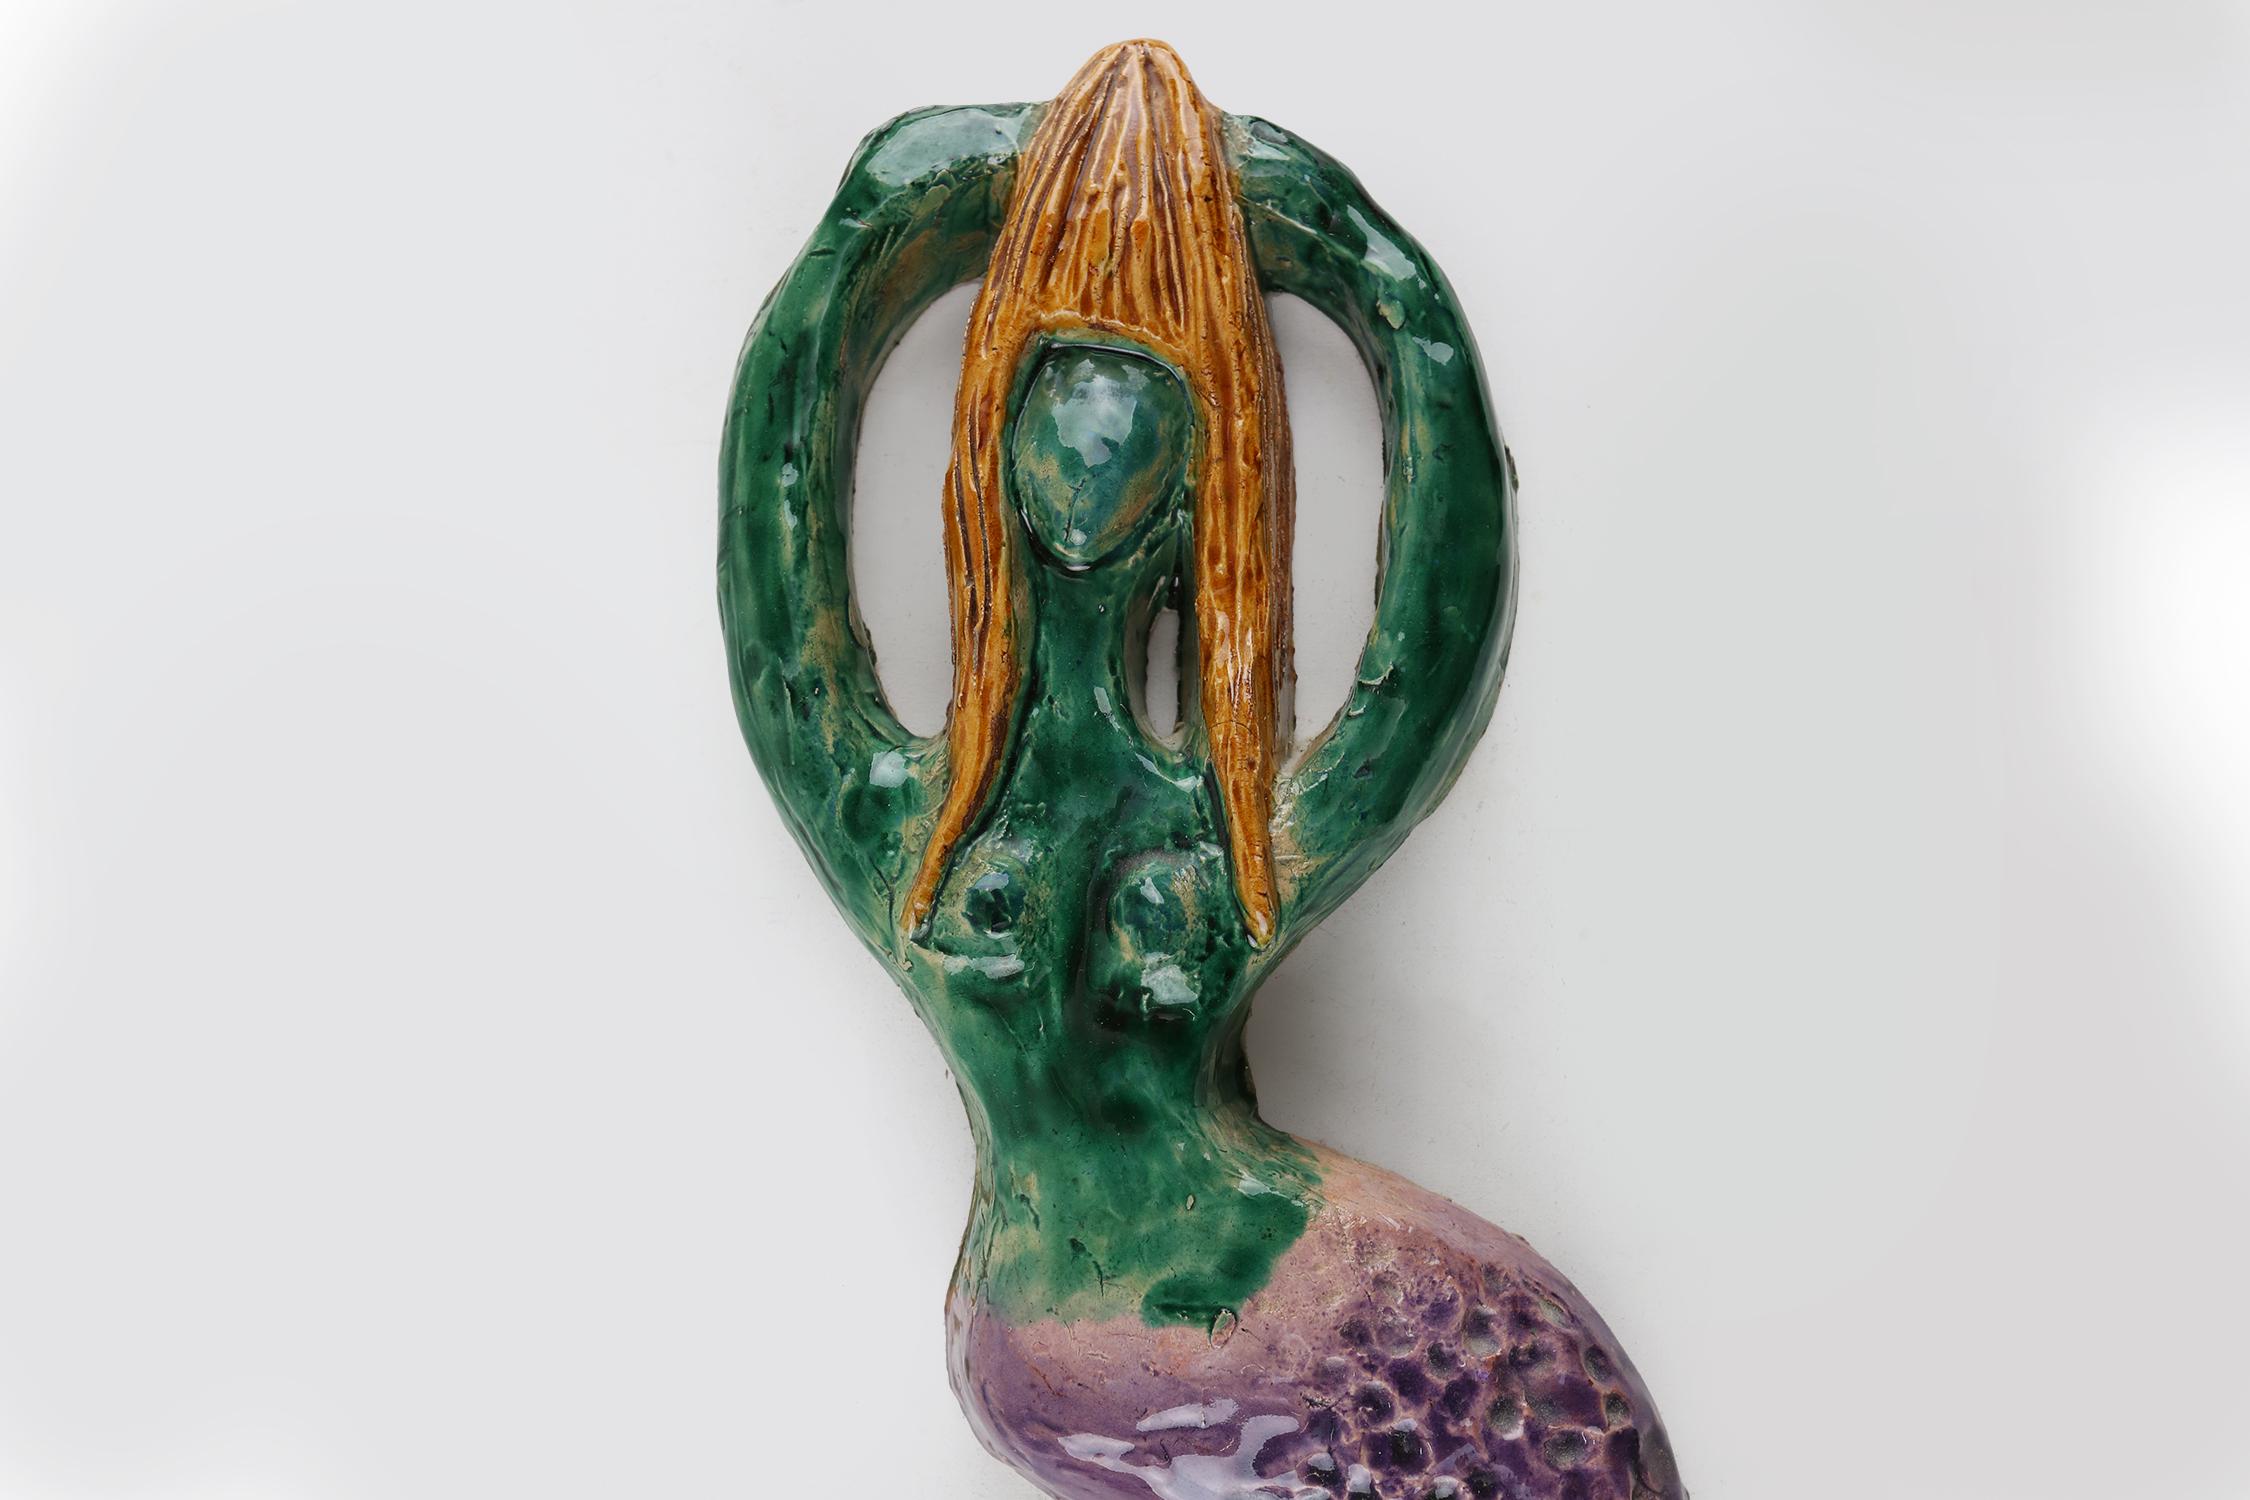 Beautiful ceramic mermaid with some great colors.